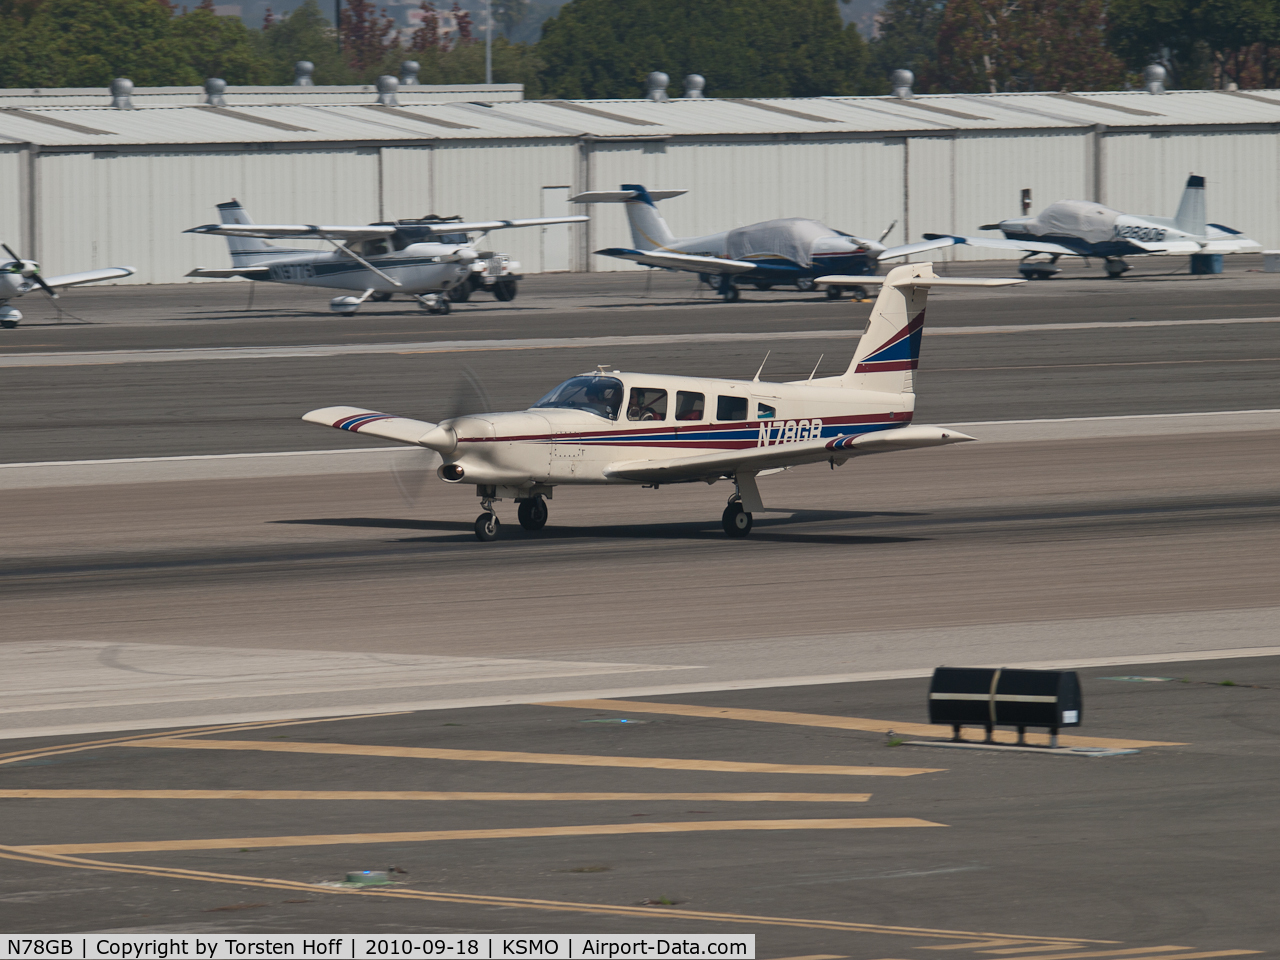 N78GB, 1978 Piper PA-32RT-300T Turbo Lance II C/N 32R-7887282, N78GB departing from RWY 21